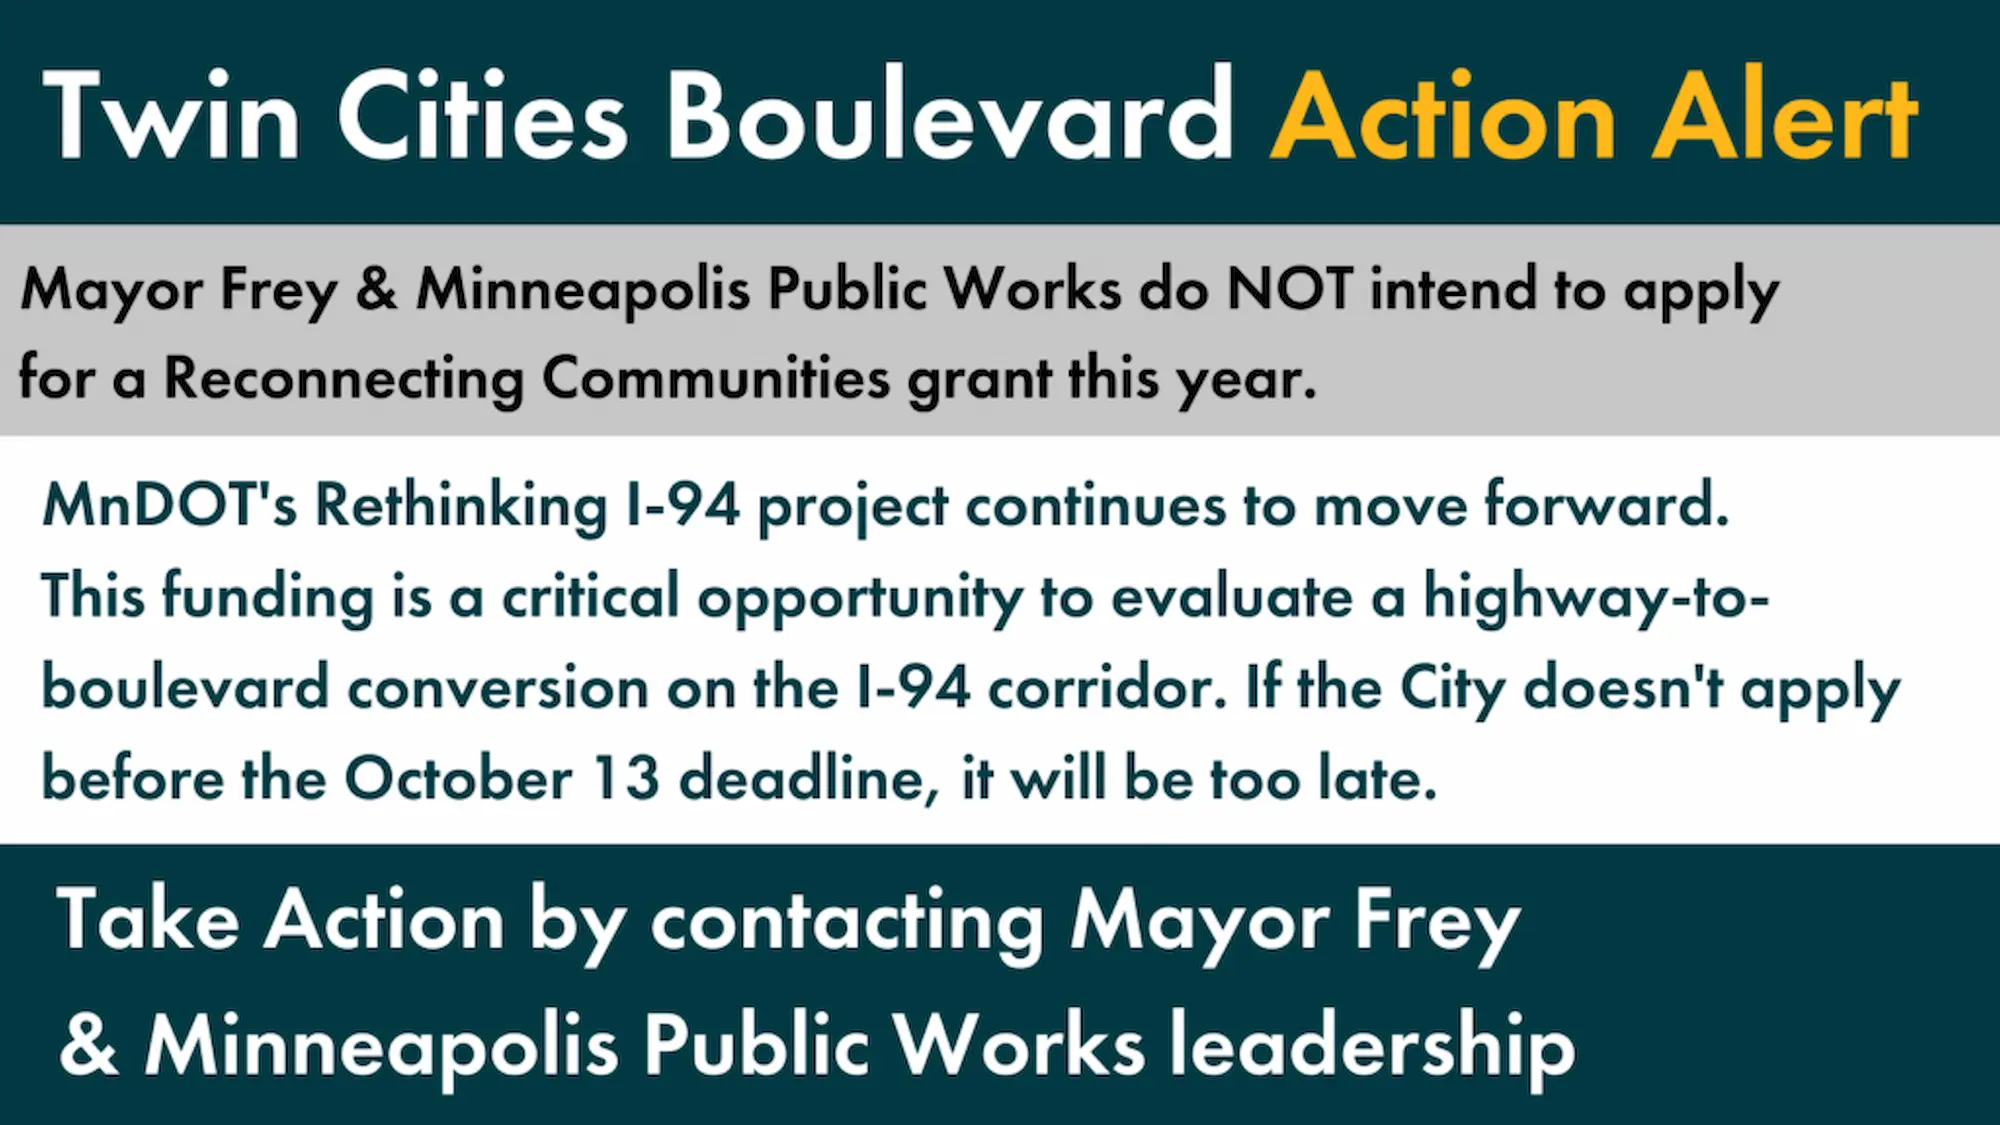 Twin Cities Boulevard action alert: Mayor Frey and MN Public Works do not intend to apply for a reconnecting communities grant this year